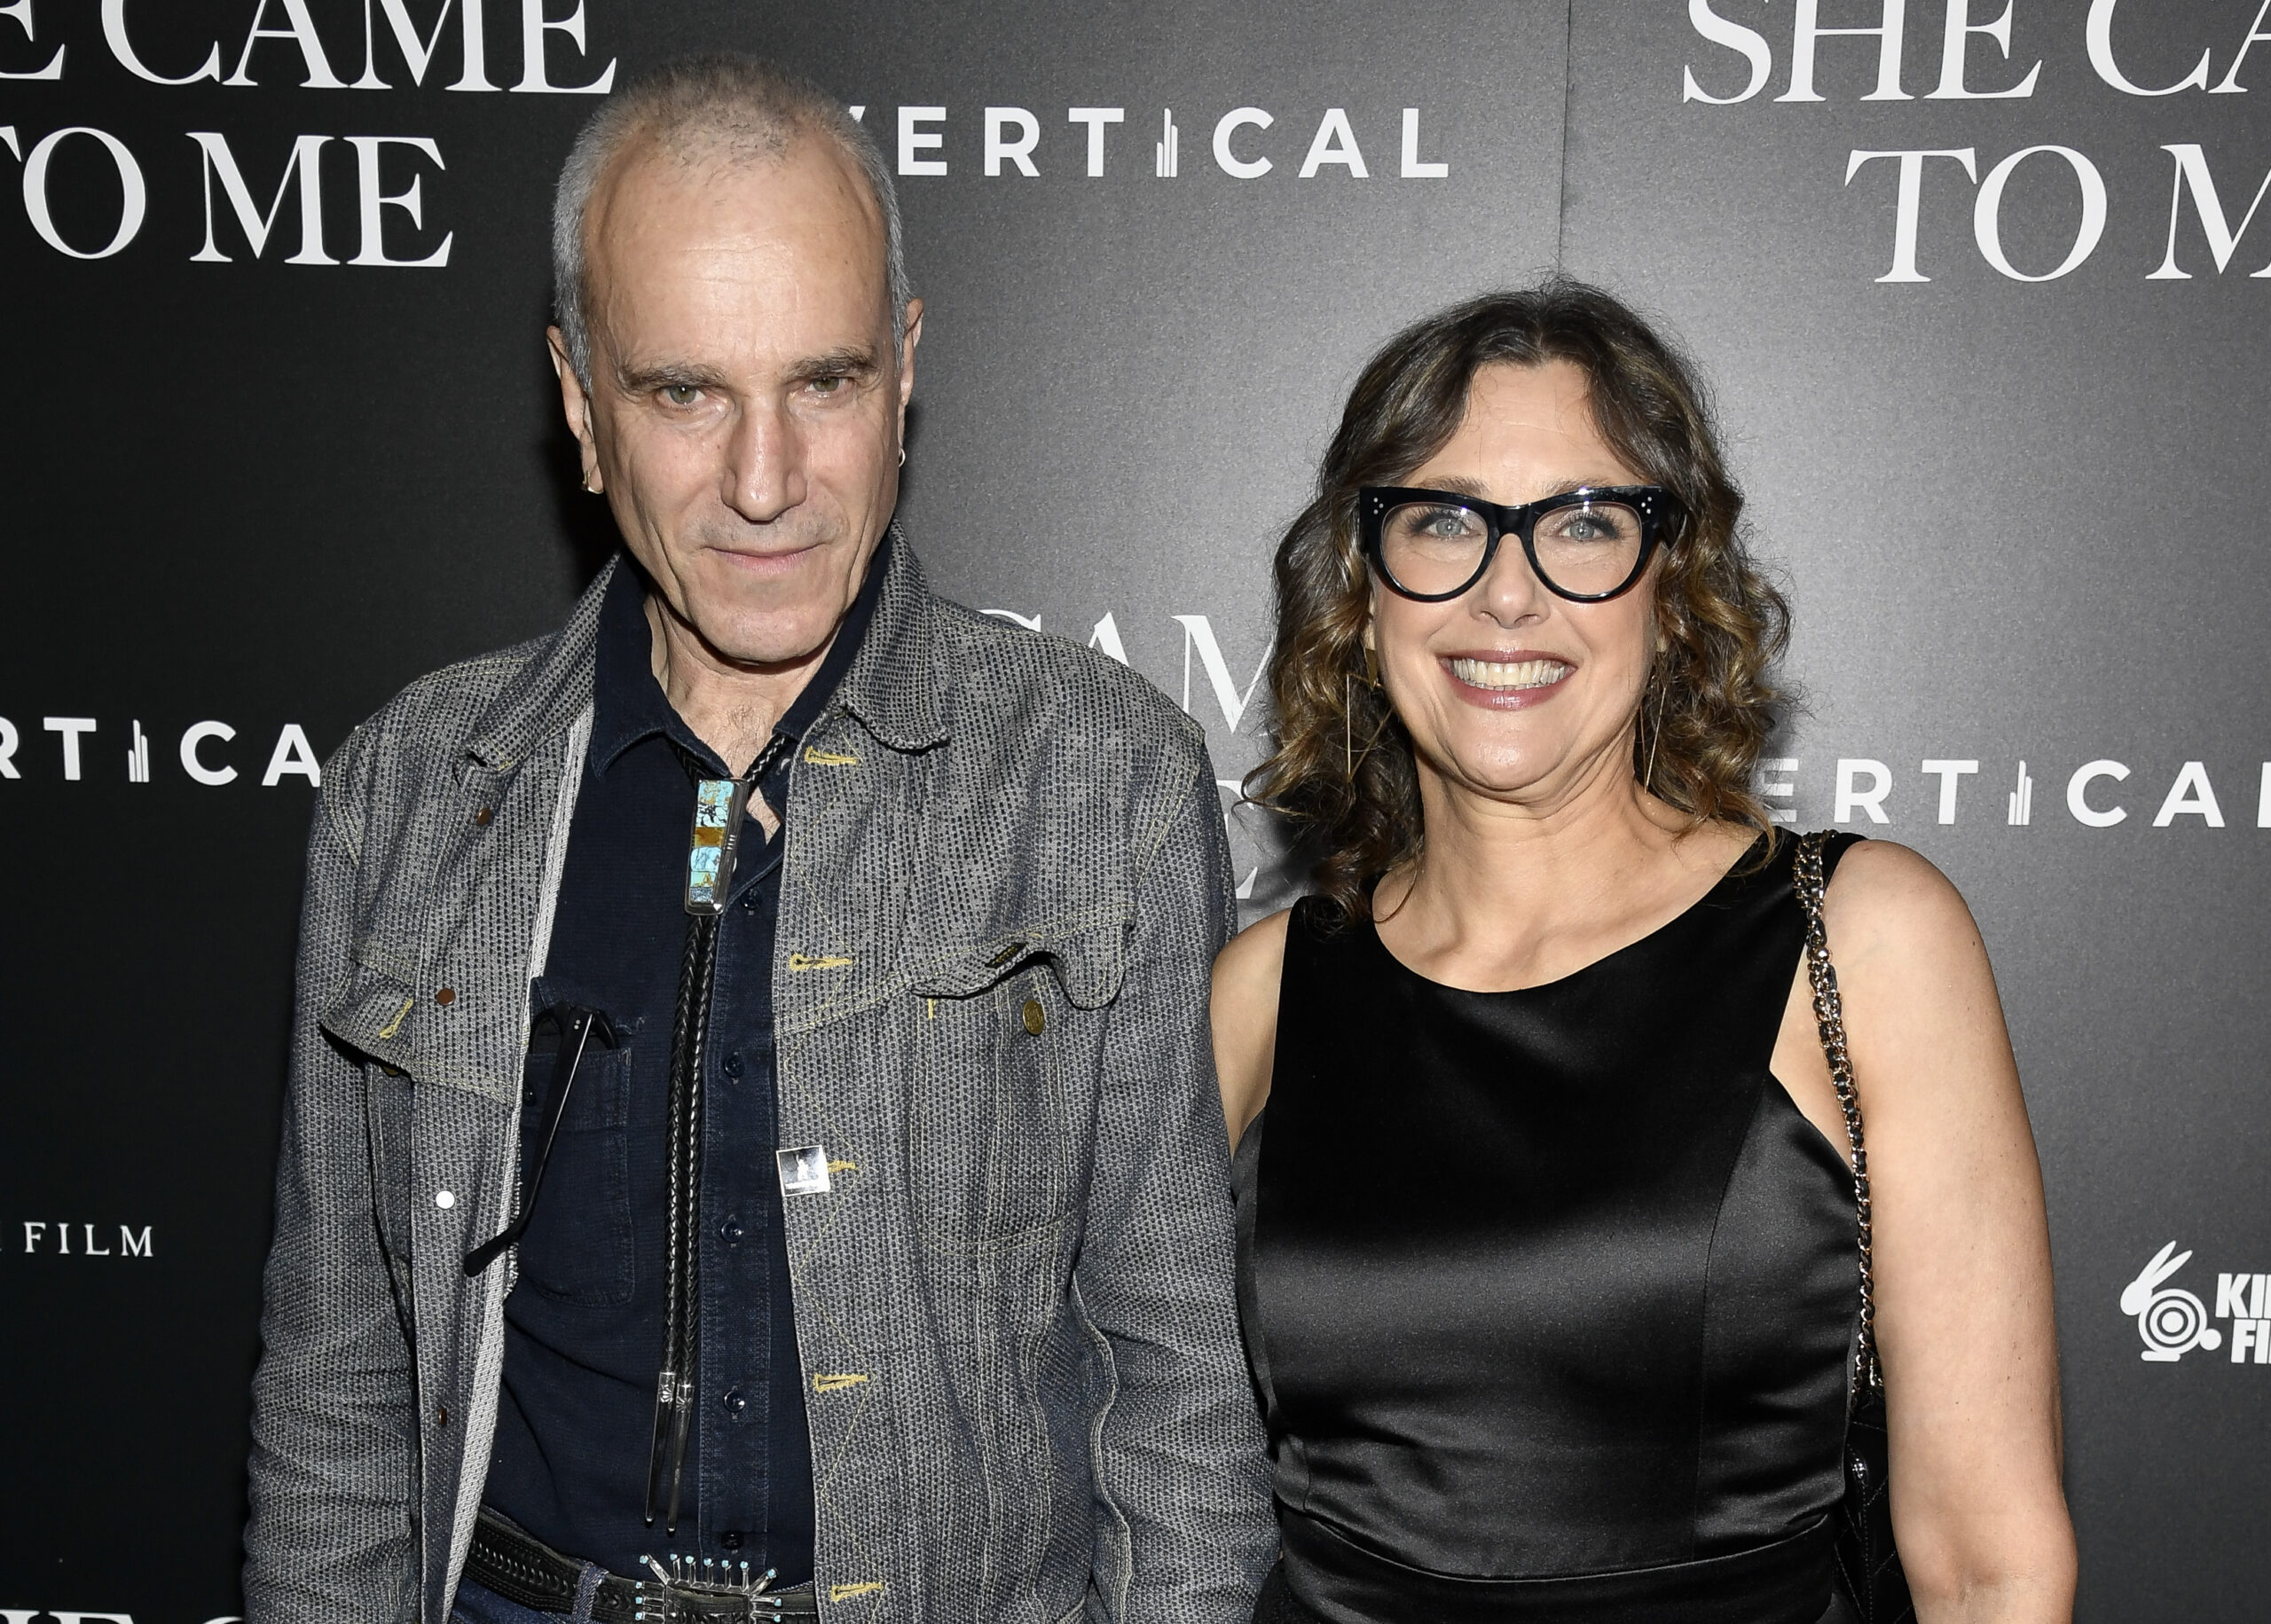 Daniel Day-Lewis, left, and wife Rebecca Miller attend a special screening of "She Came to Me" at Metrograph on Tuesday, Oct. 3, 2023, in New York. (Photo by Evan Agostini/Invision/AP)